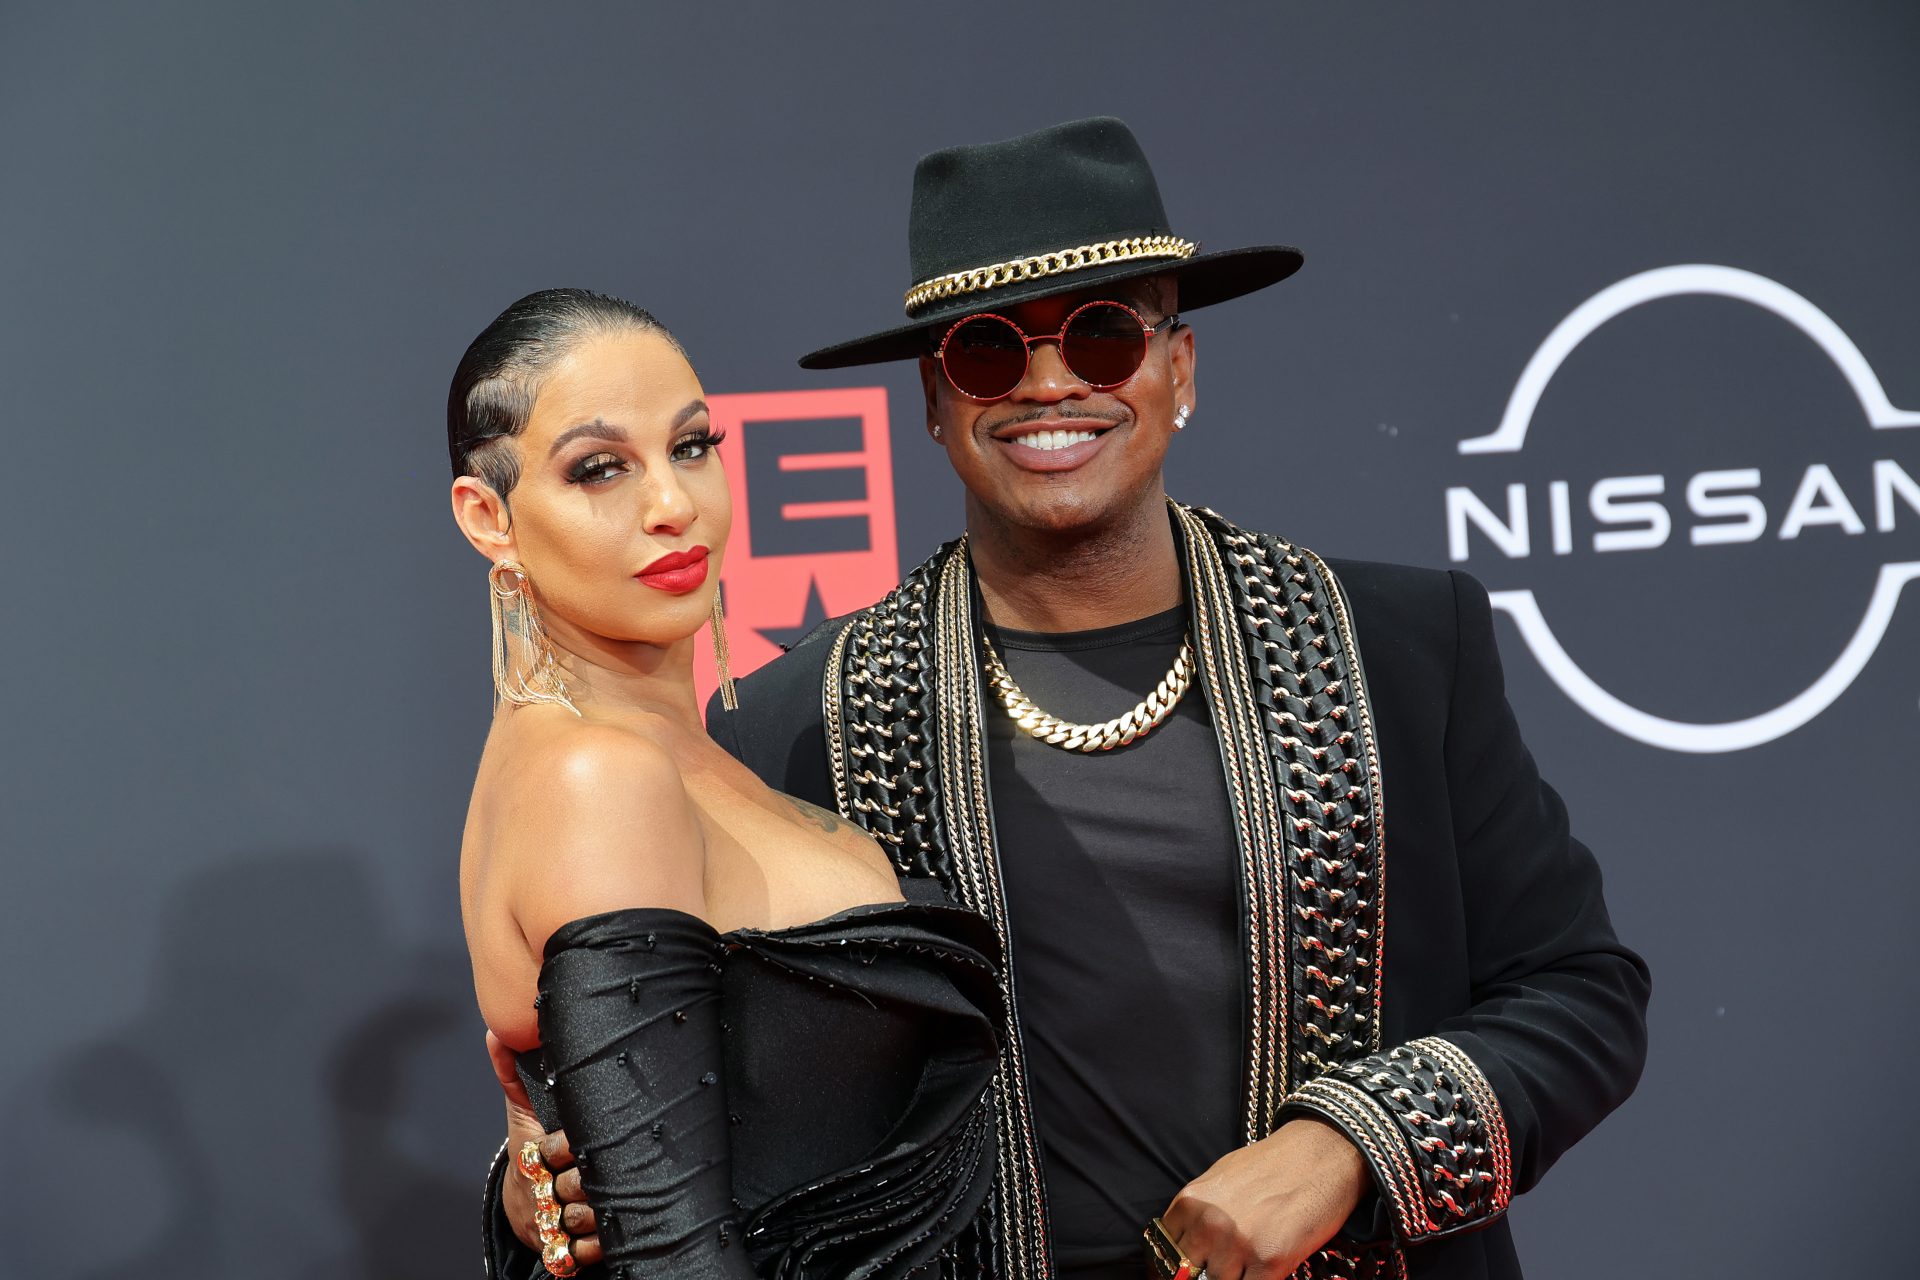 Crystal Smith Takes To Instagram With Lengthy Post Detailing Allegations Of Infidelity From Ne-Yo—“I Will No Longer Lie To The Public”